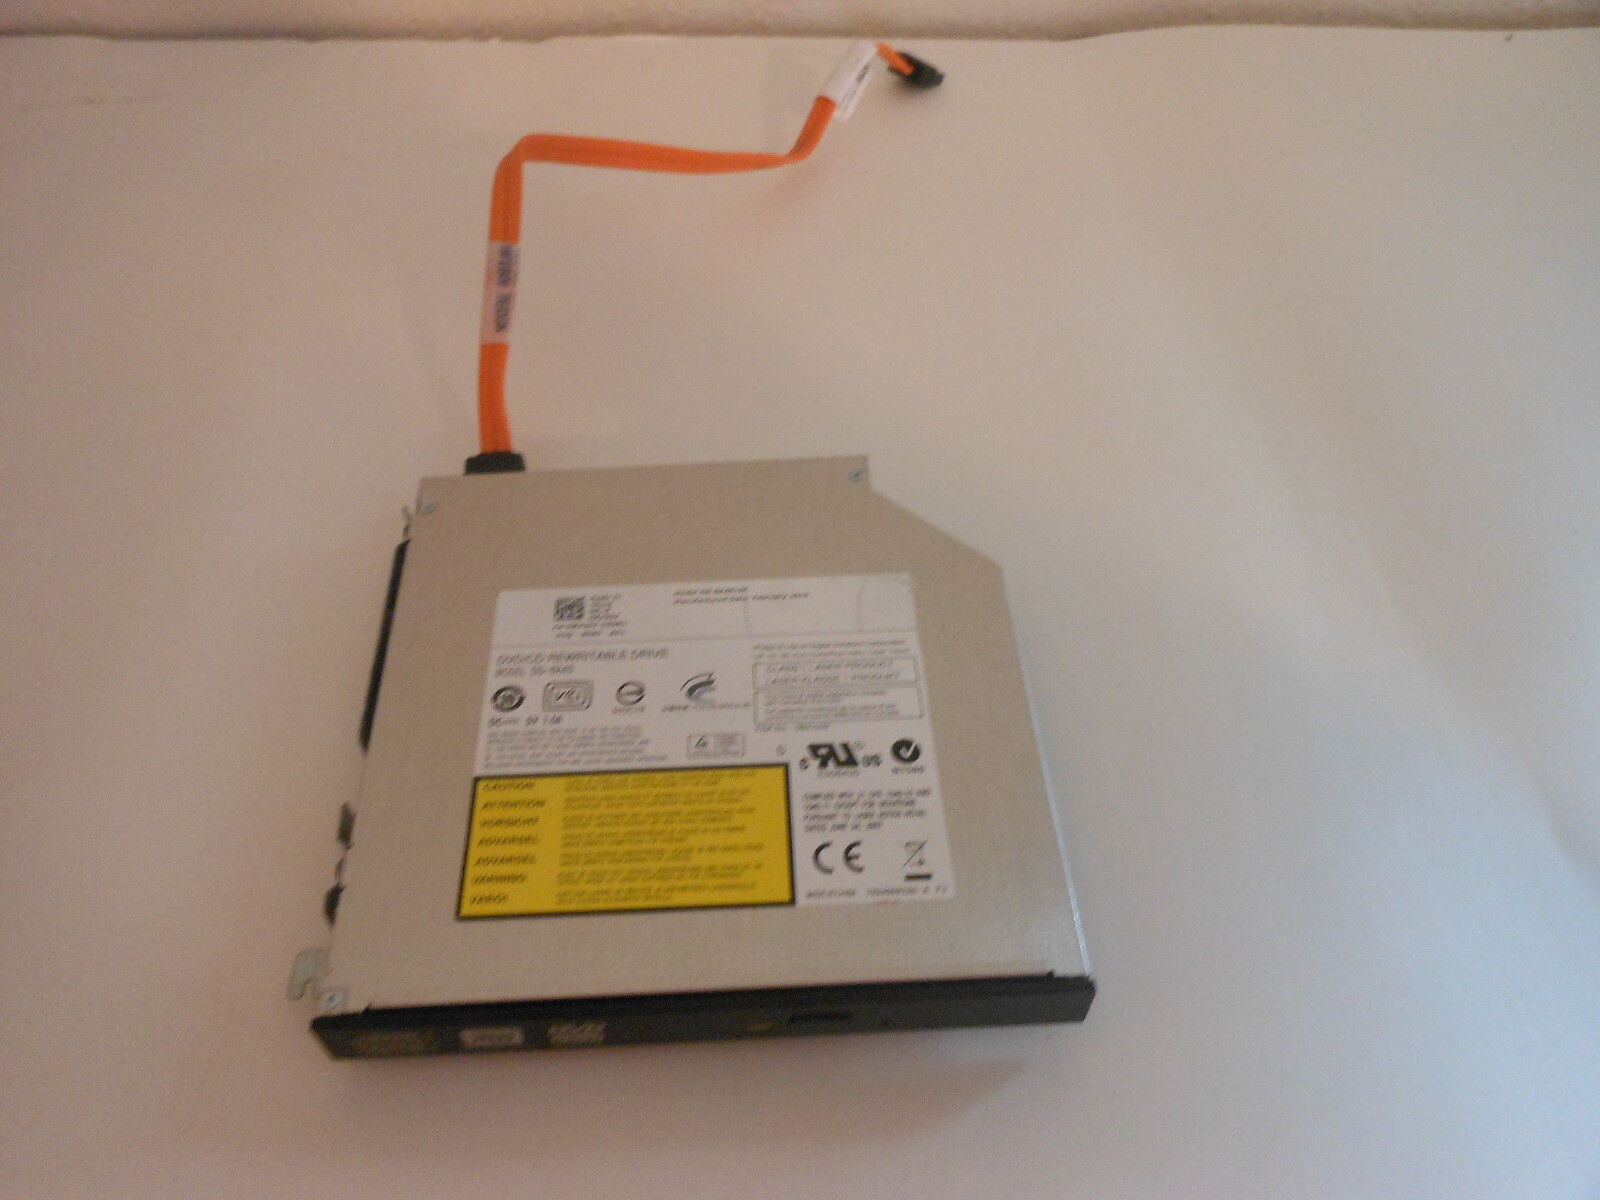 Dell Phillips & Lite-on DS-8A4S XV367 Lite-on DVD/CD Re writable Drive 